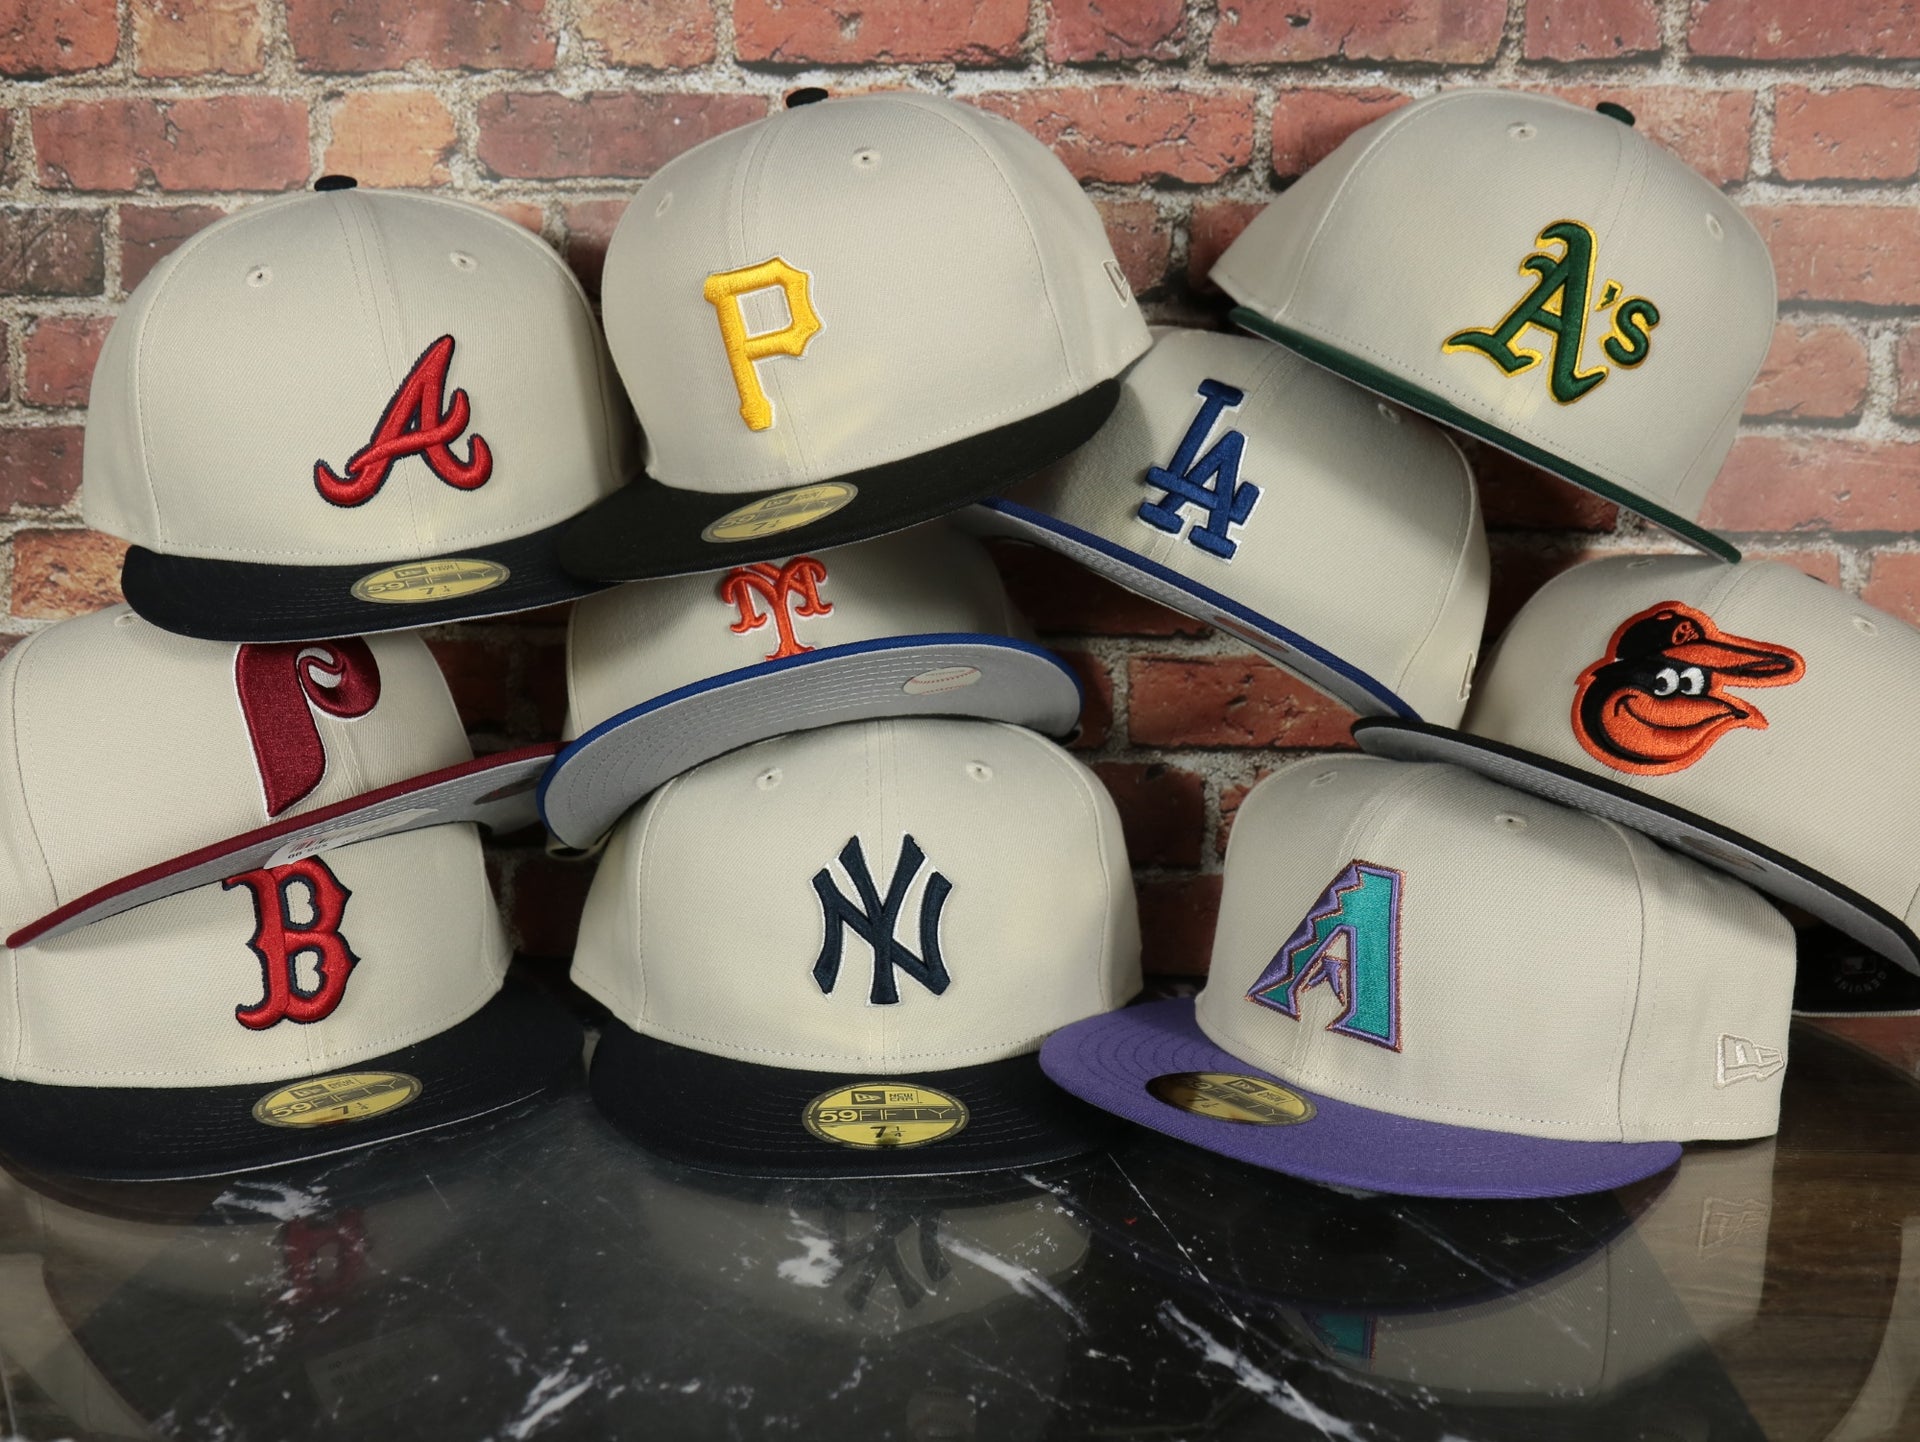 Wear Your Team's Success with World Class World Series Champions Hats!